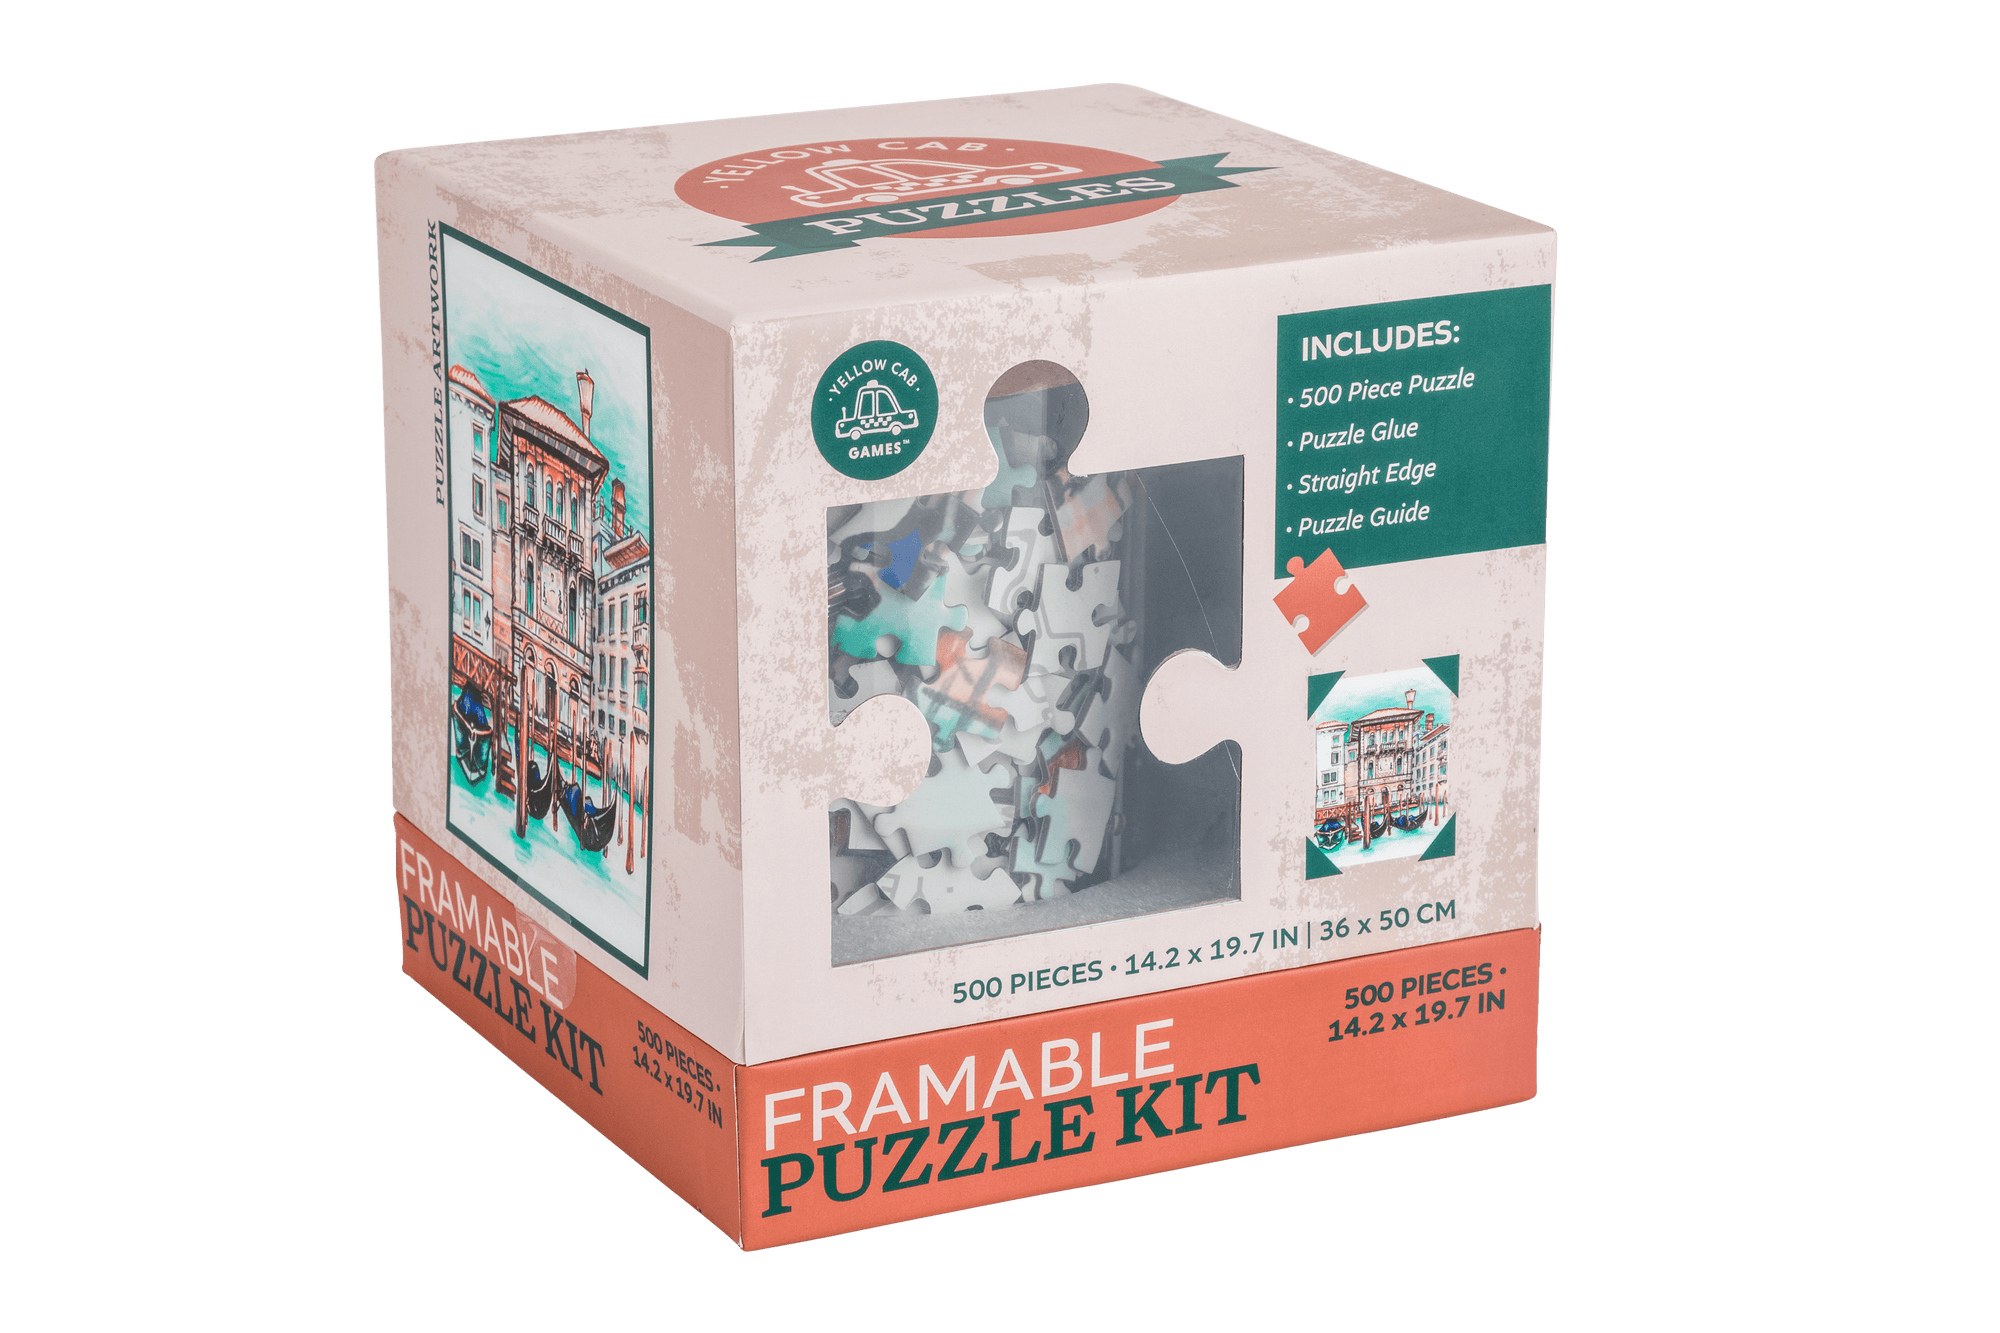 Venice Framable Puzzle